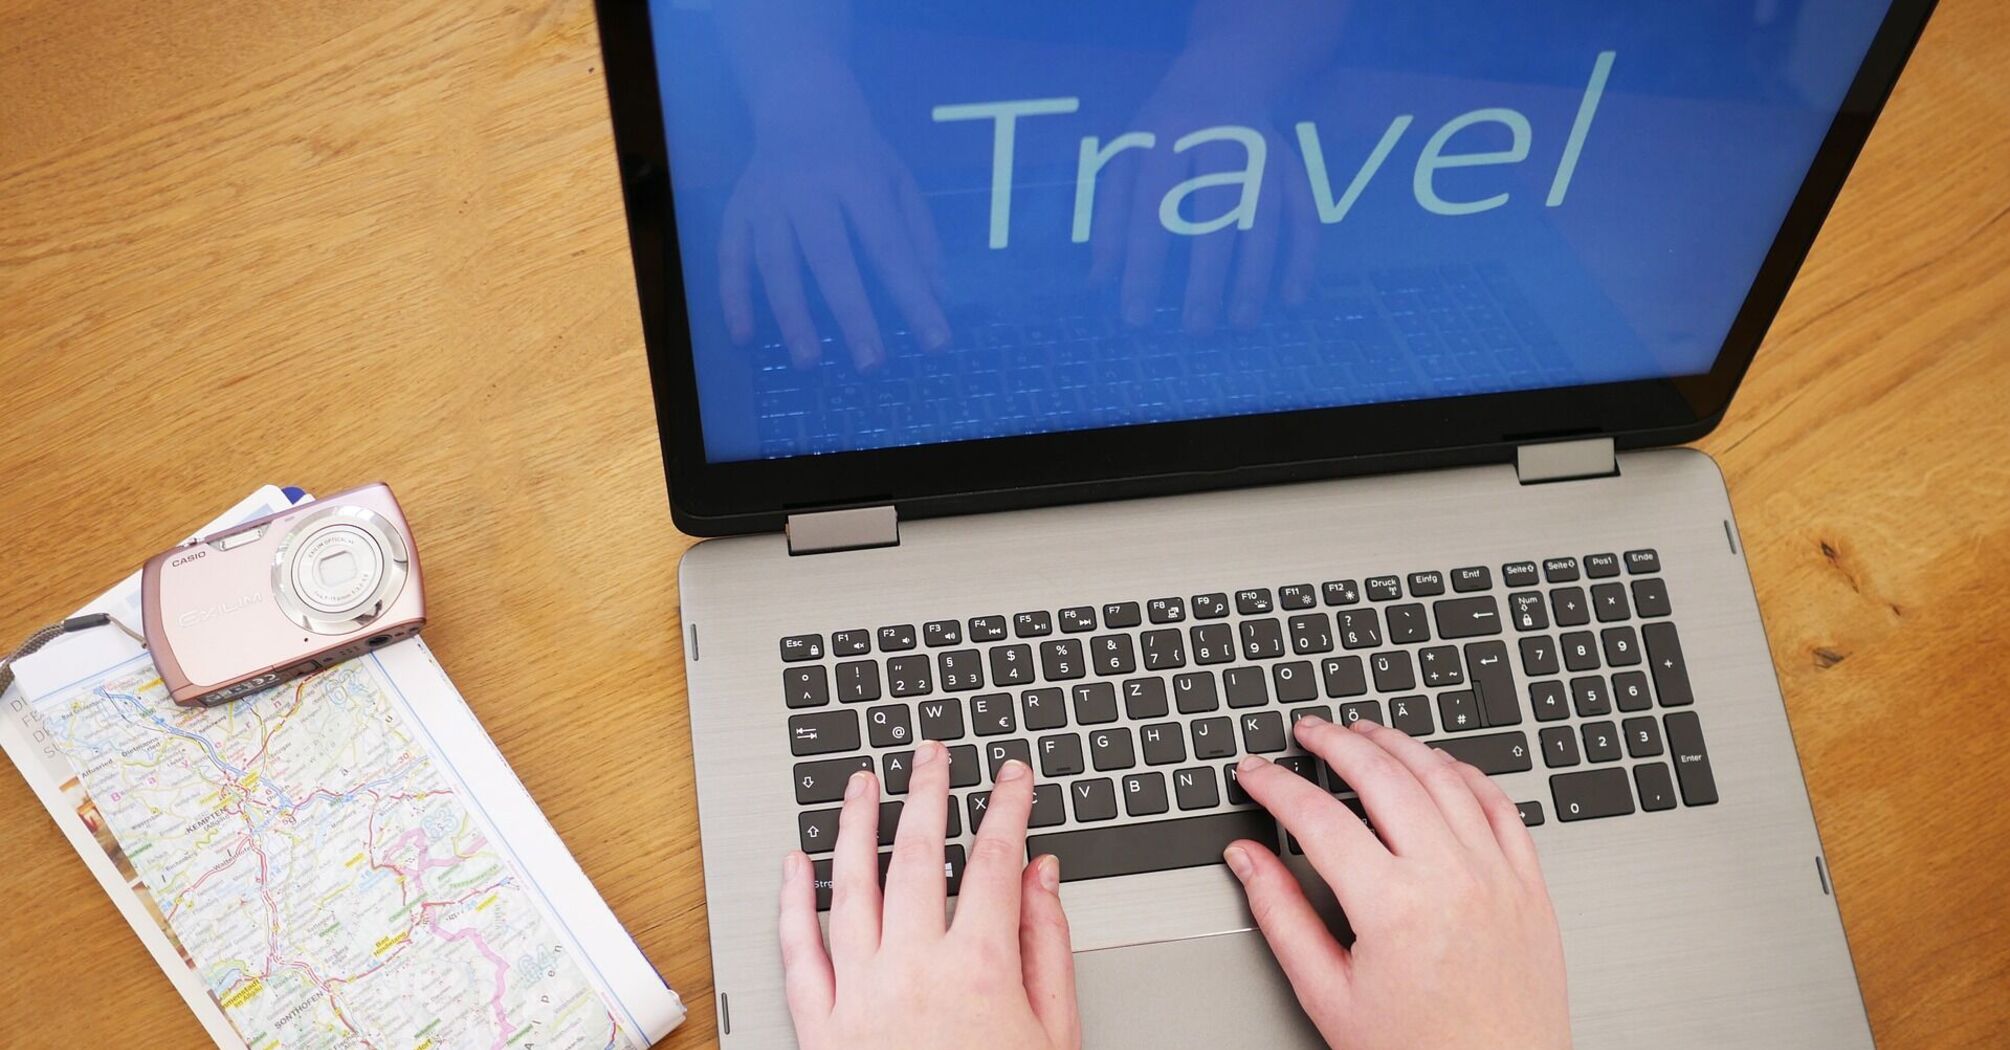 Travel planning with laptop, camera, watch, and map